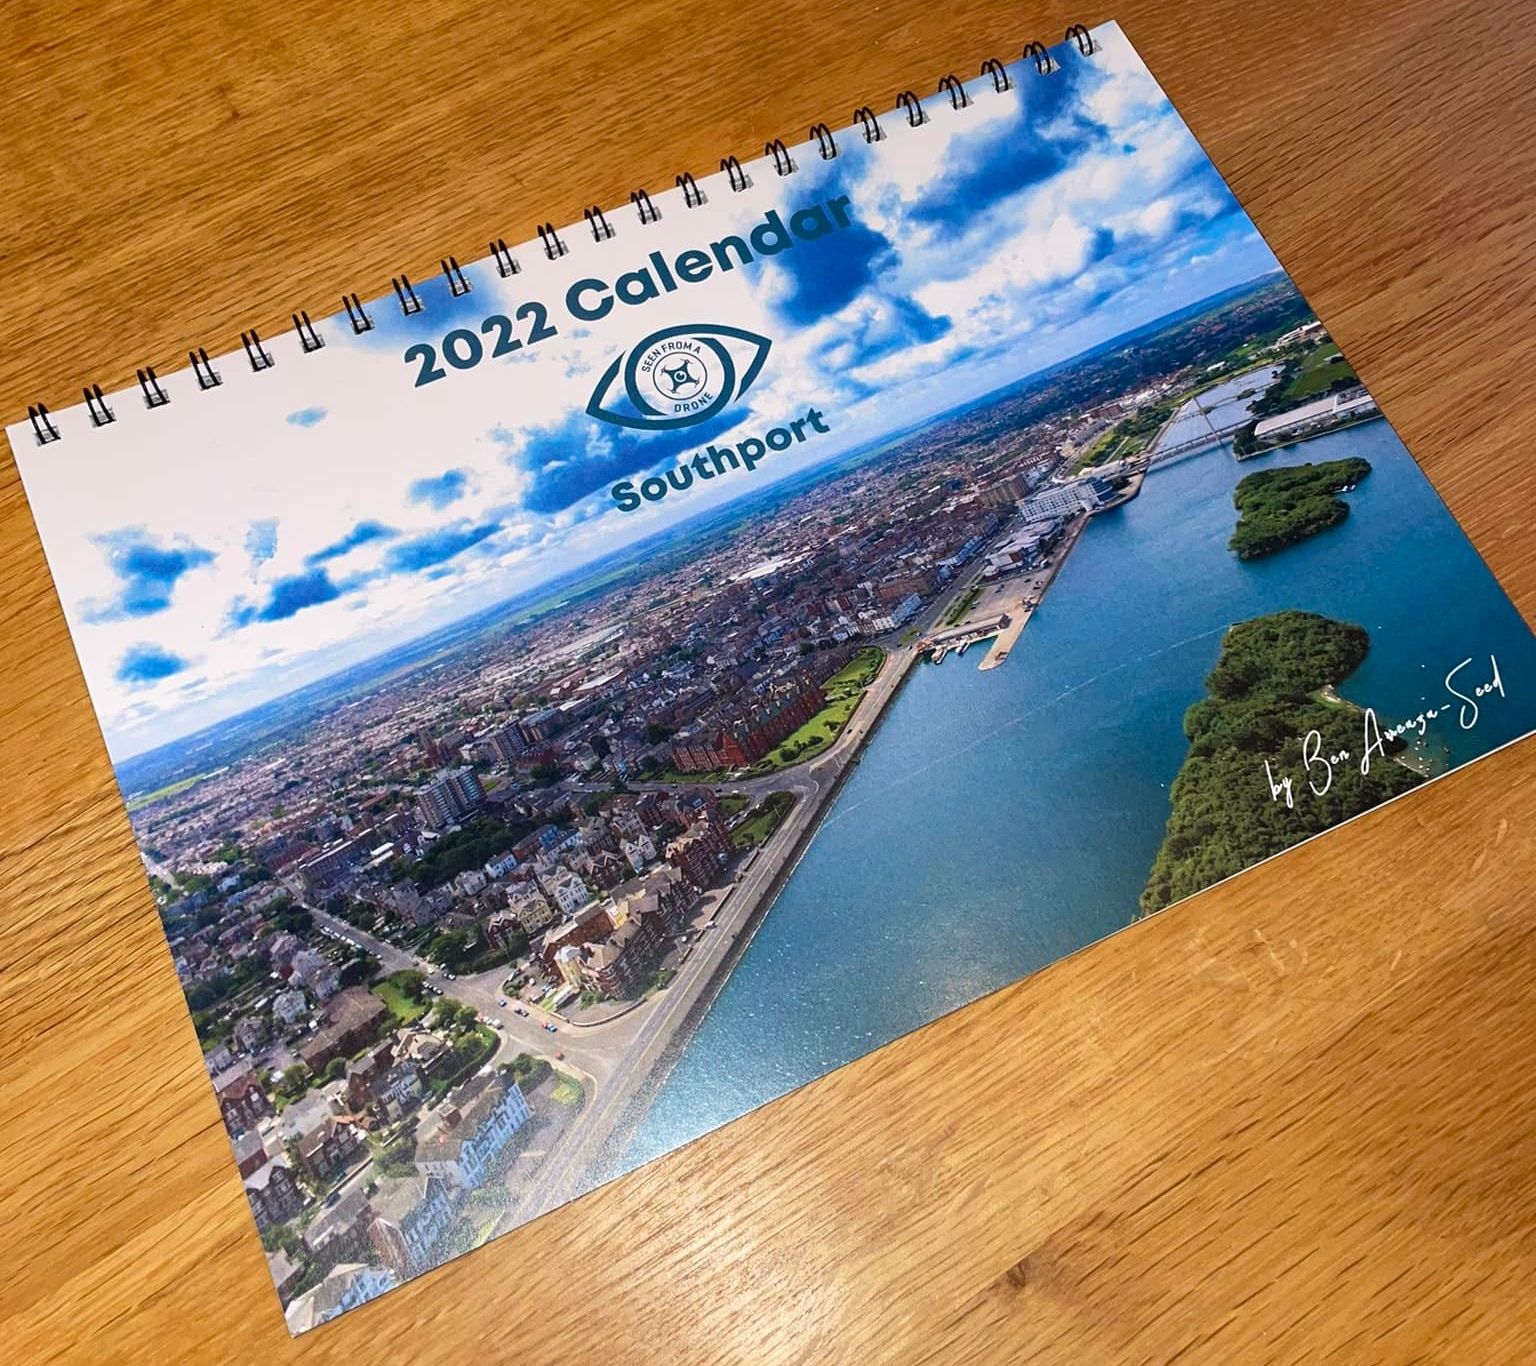 The 2022 Southport calendar by Ben Arreaza-Seed